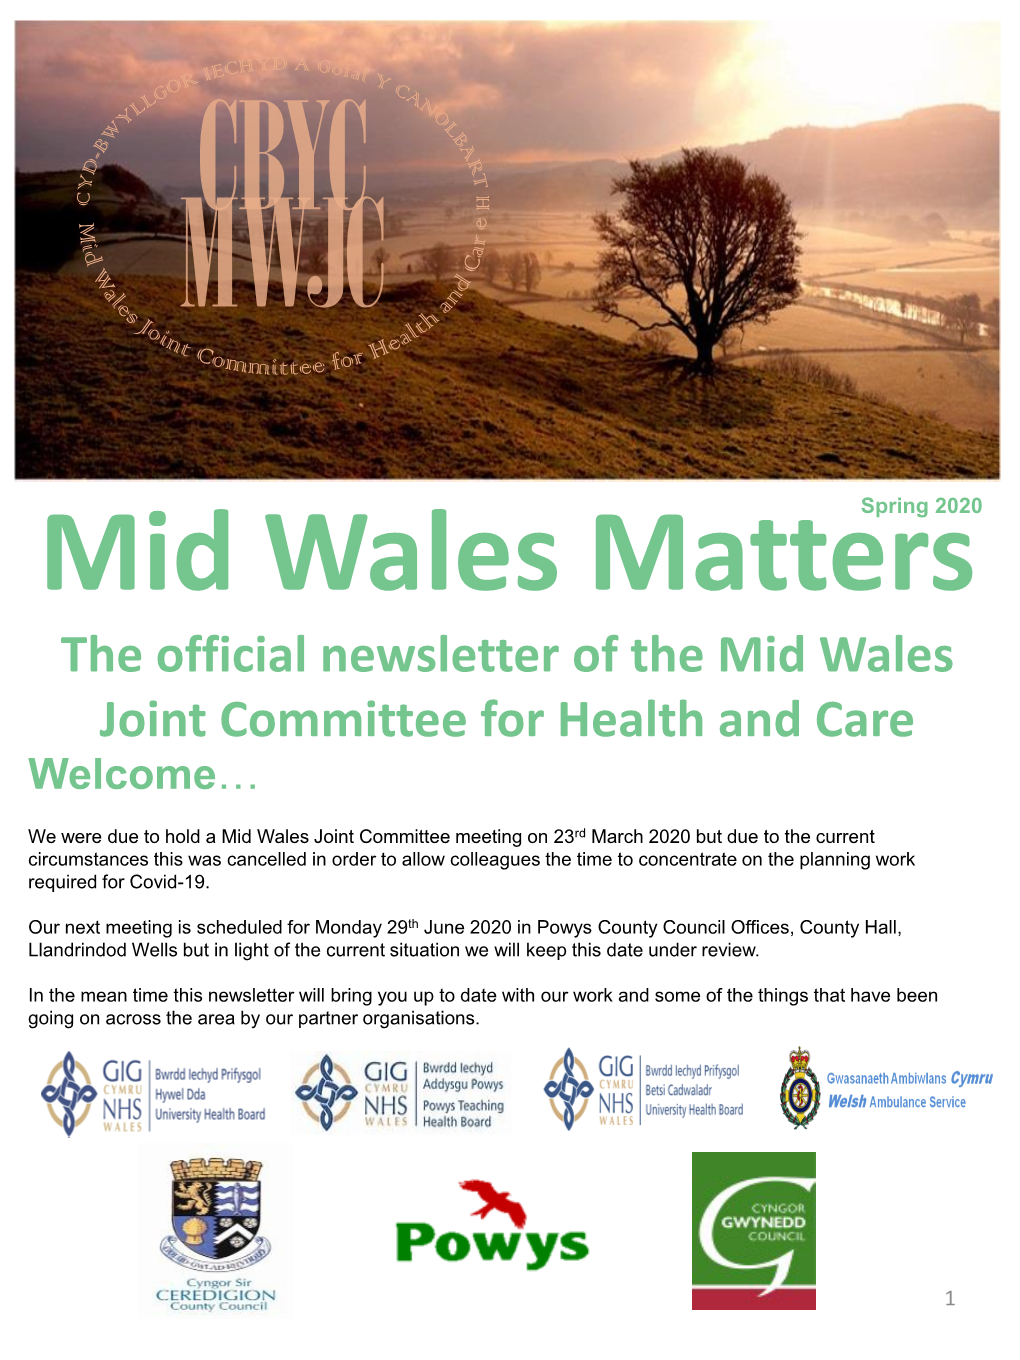 The Official Newsletter of the Mid Wales Joint Committee for Health and Care Welcome…